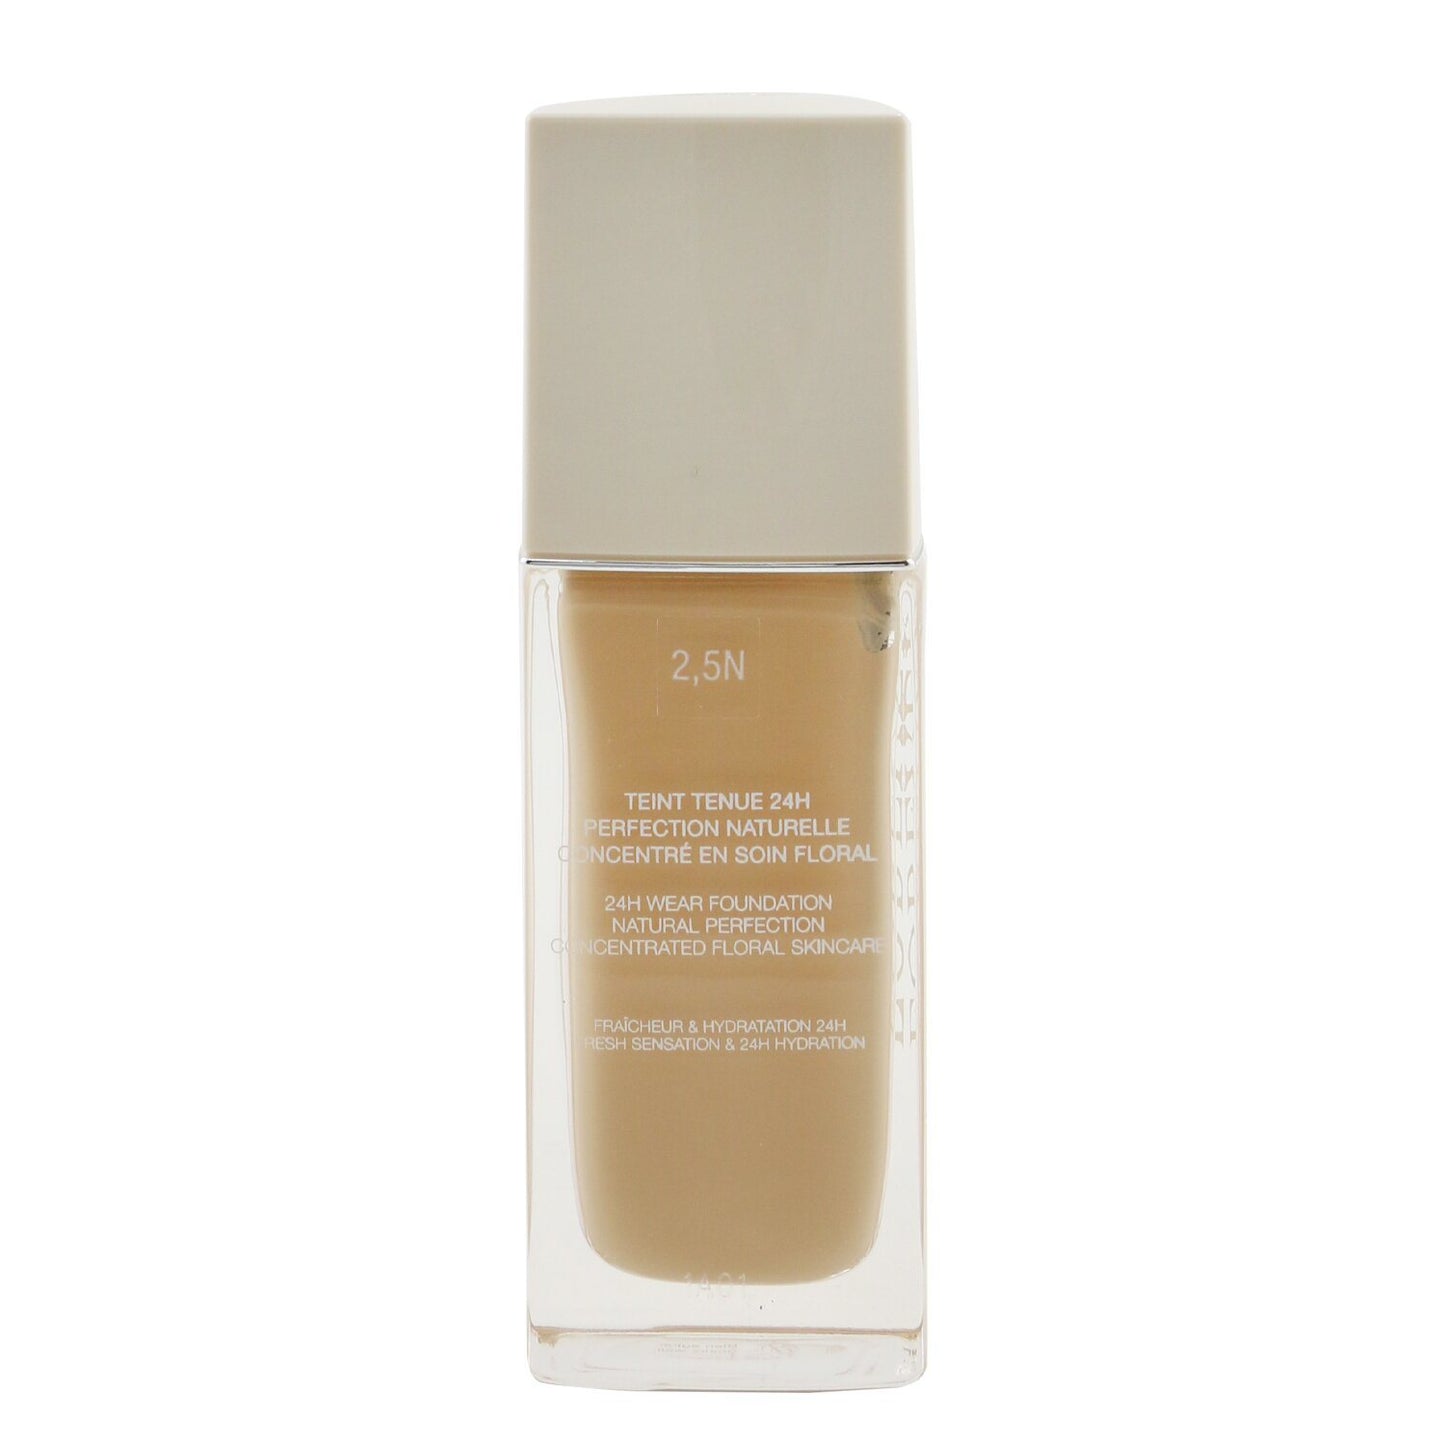 CHRISTIAN DIOR - Dior Forever Natural Nude 24H Wear Foundation - # 2.5N Neutral C018000025 / 525824 30ml/1oz - lolaluxeshop